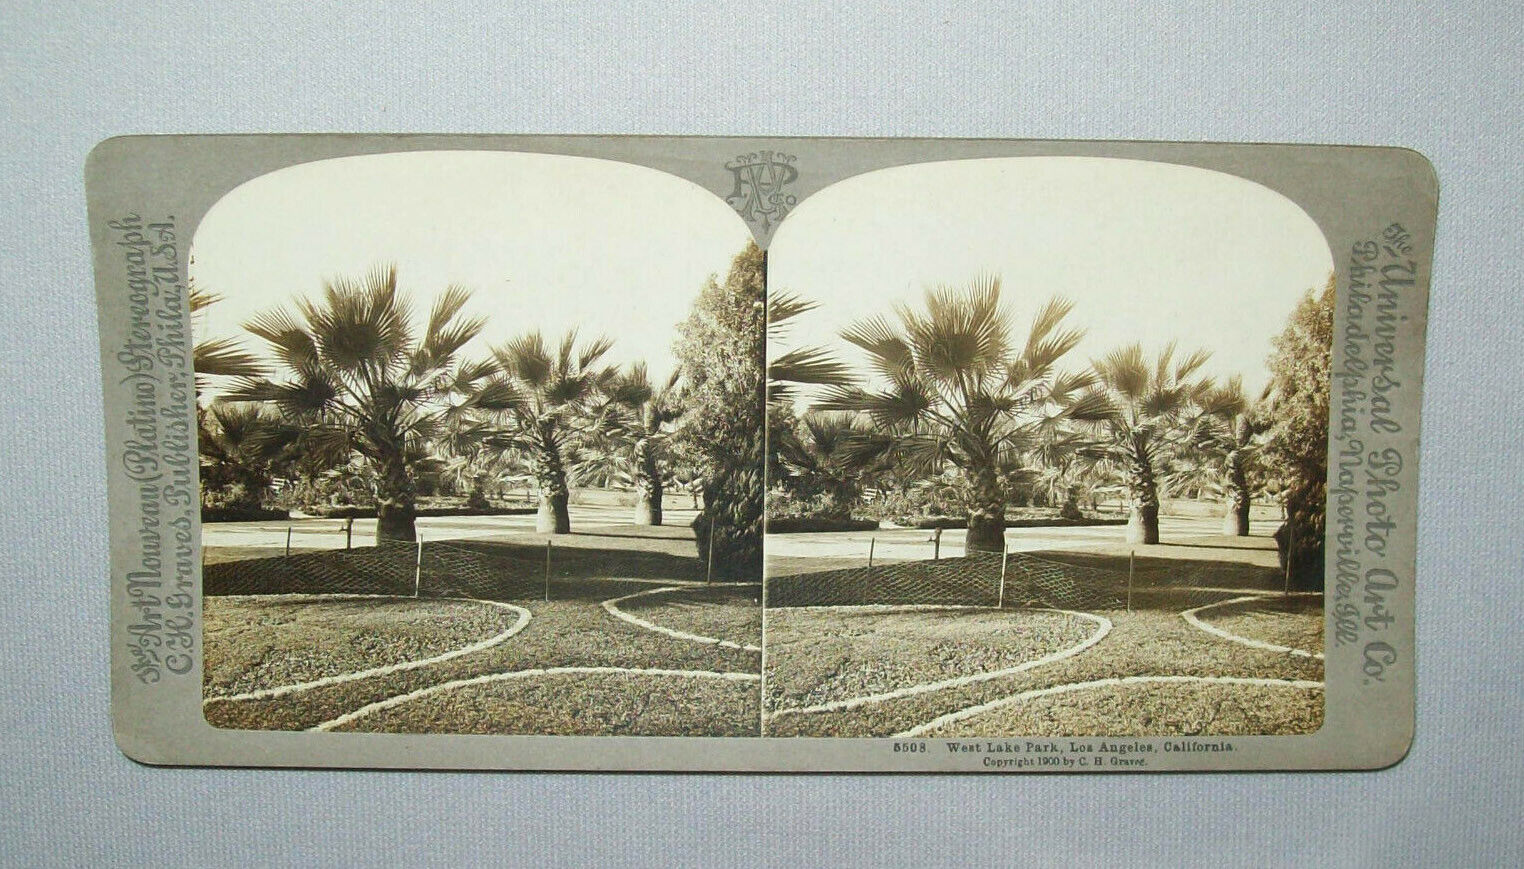 Antique Vtg 1900s W Lake Park Los Angels California Stereoview Photo Card Nice